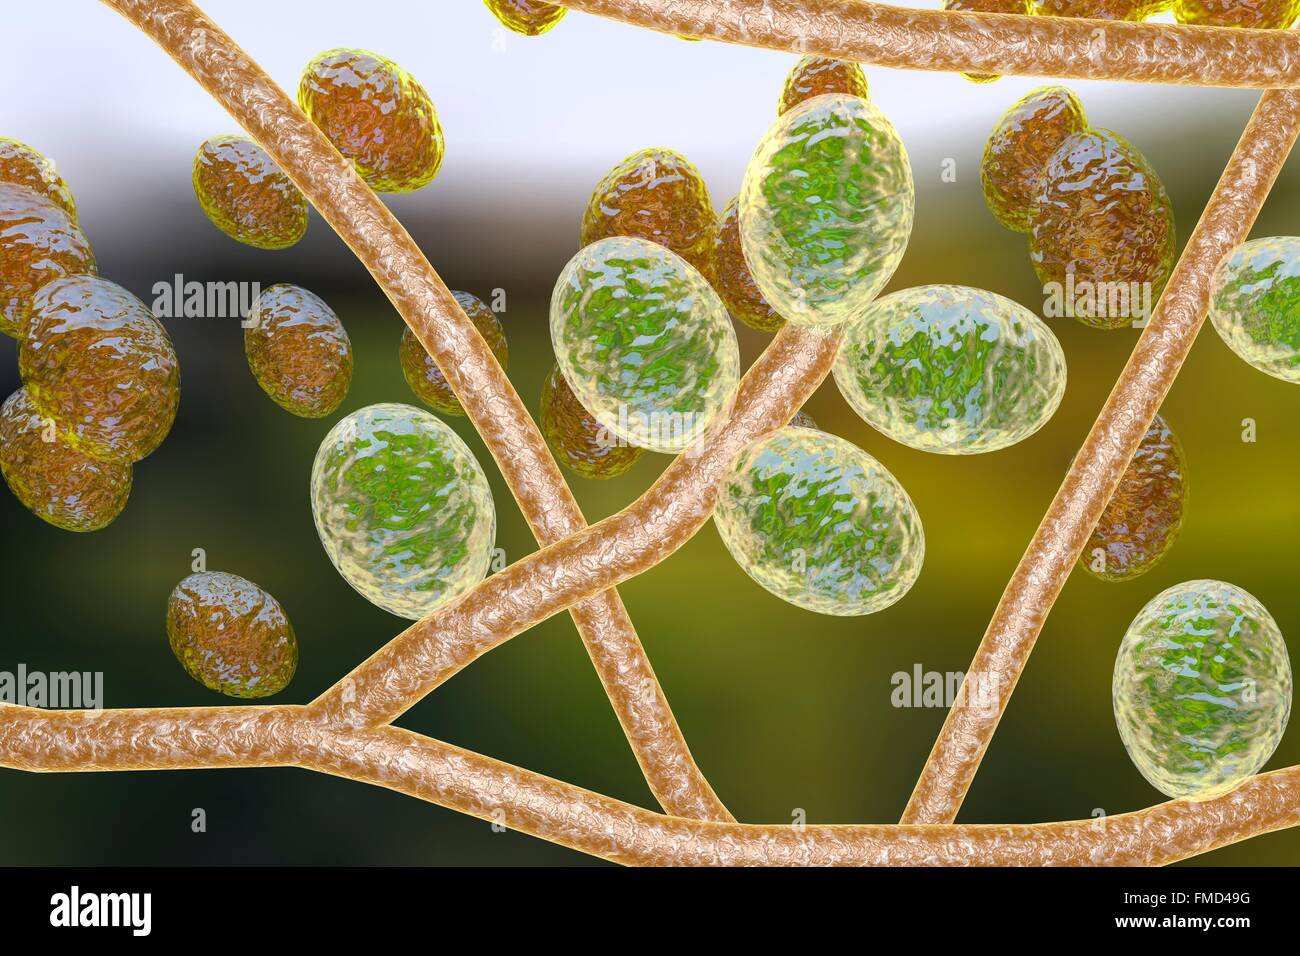 Computer illustration of Trichophyton mentagrophytes, the cause of athlete's foot (tinea pedis) and scalp ringworm (tinea capitus). Both of these contagious skin infections are spread by the fungus's spores (orange). T. mentagrophytes is one of many species of fungi that can grow in human skin, causing inflammation and itching. Athlete's foot and ringworm are treated with antifungal drugs. Stock Photo